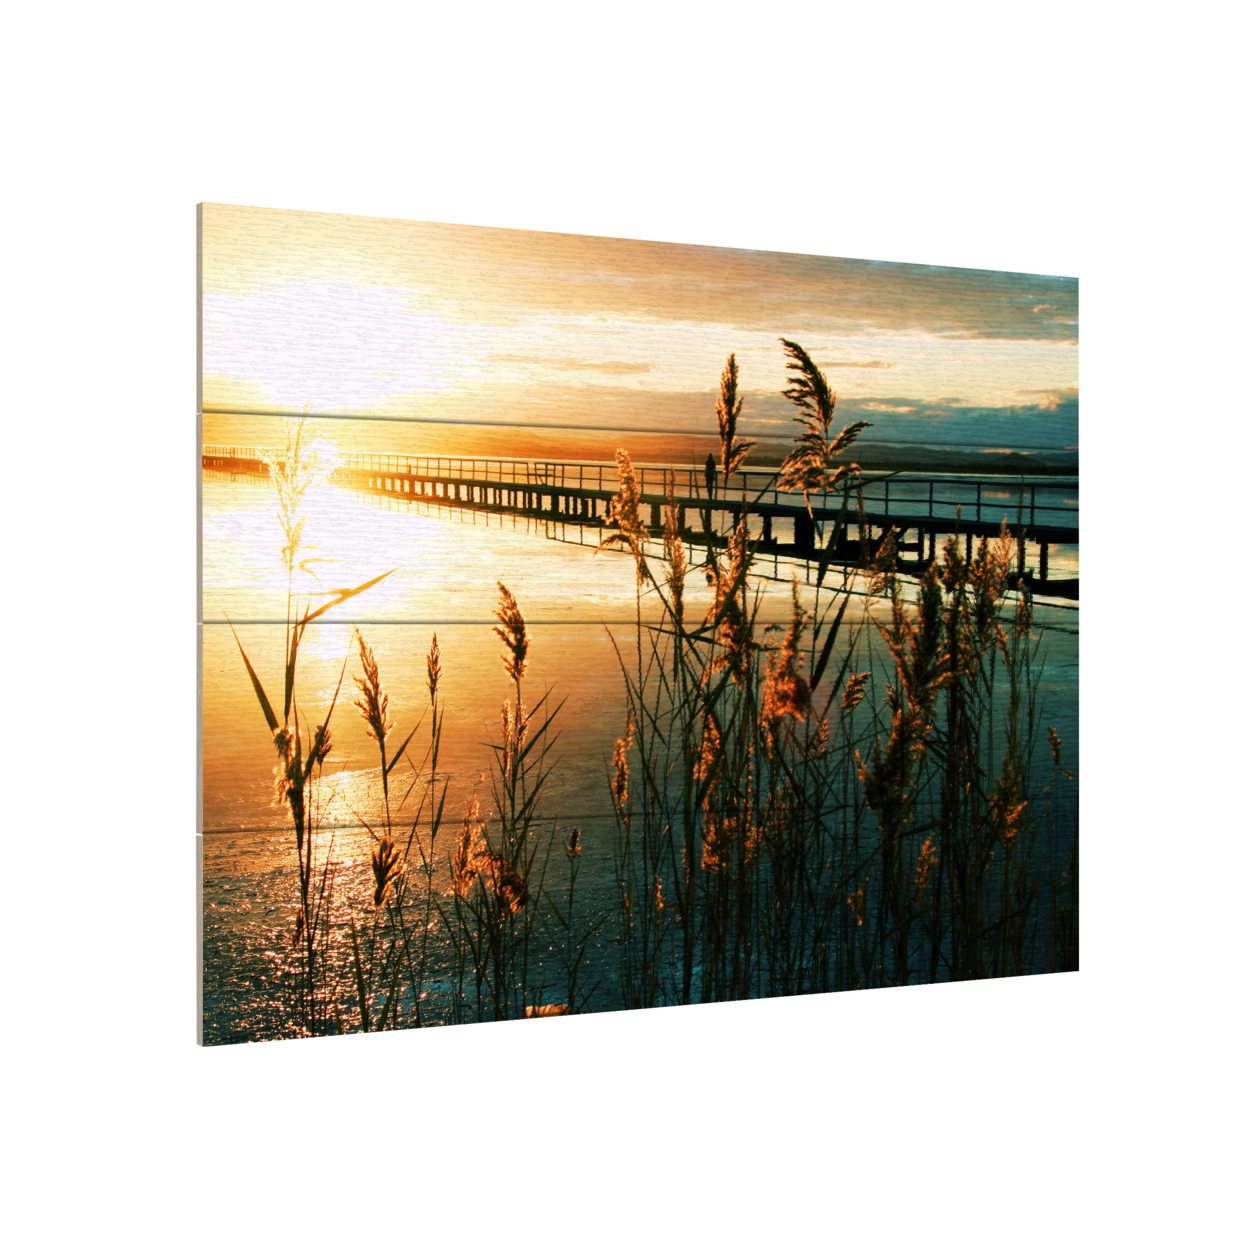 Wall Art 12 X 16 Inches Titled Wish You Were Here Ready To Hang Printed On Wooden Planks